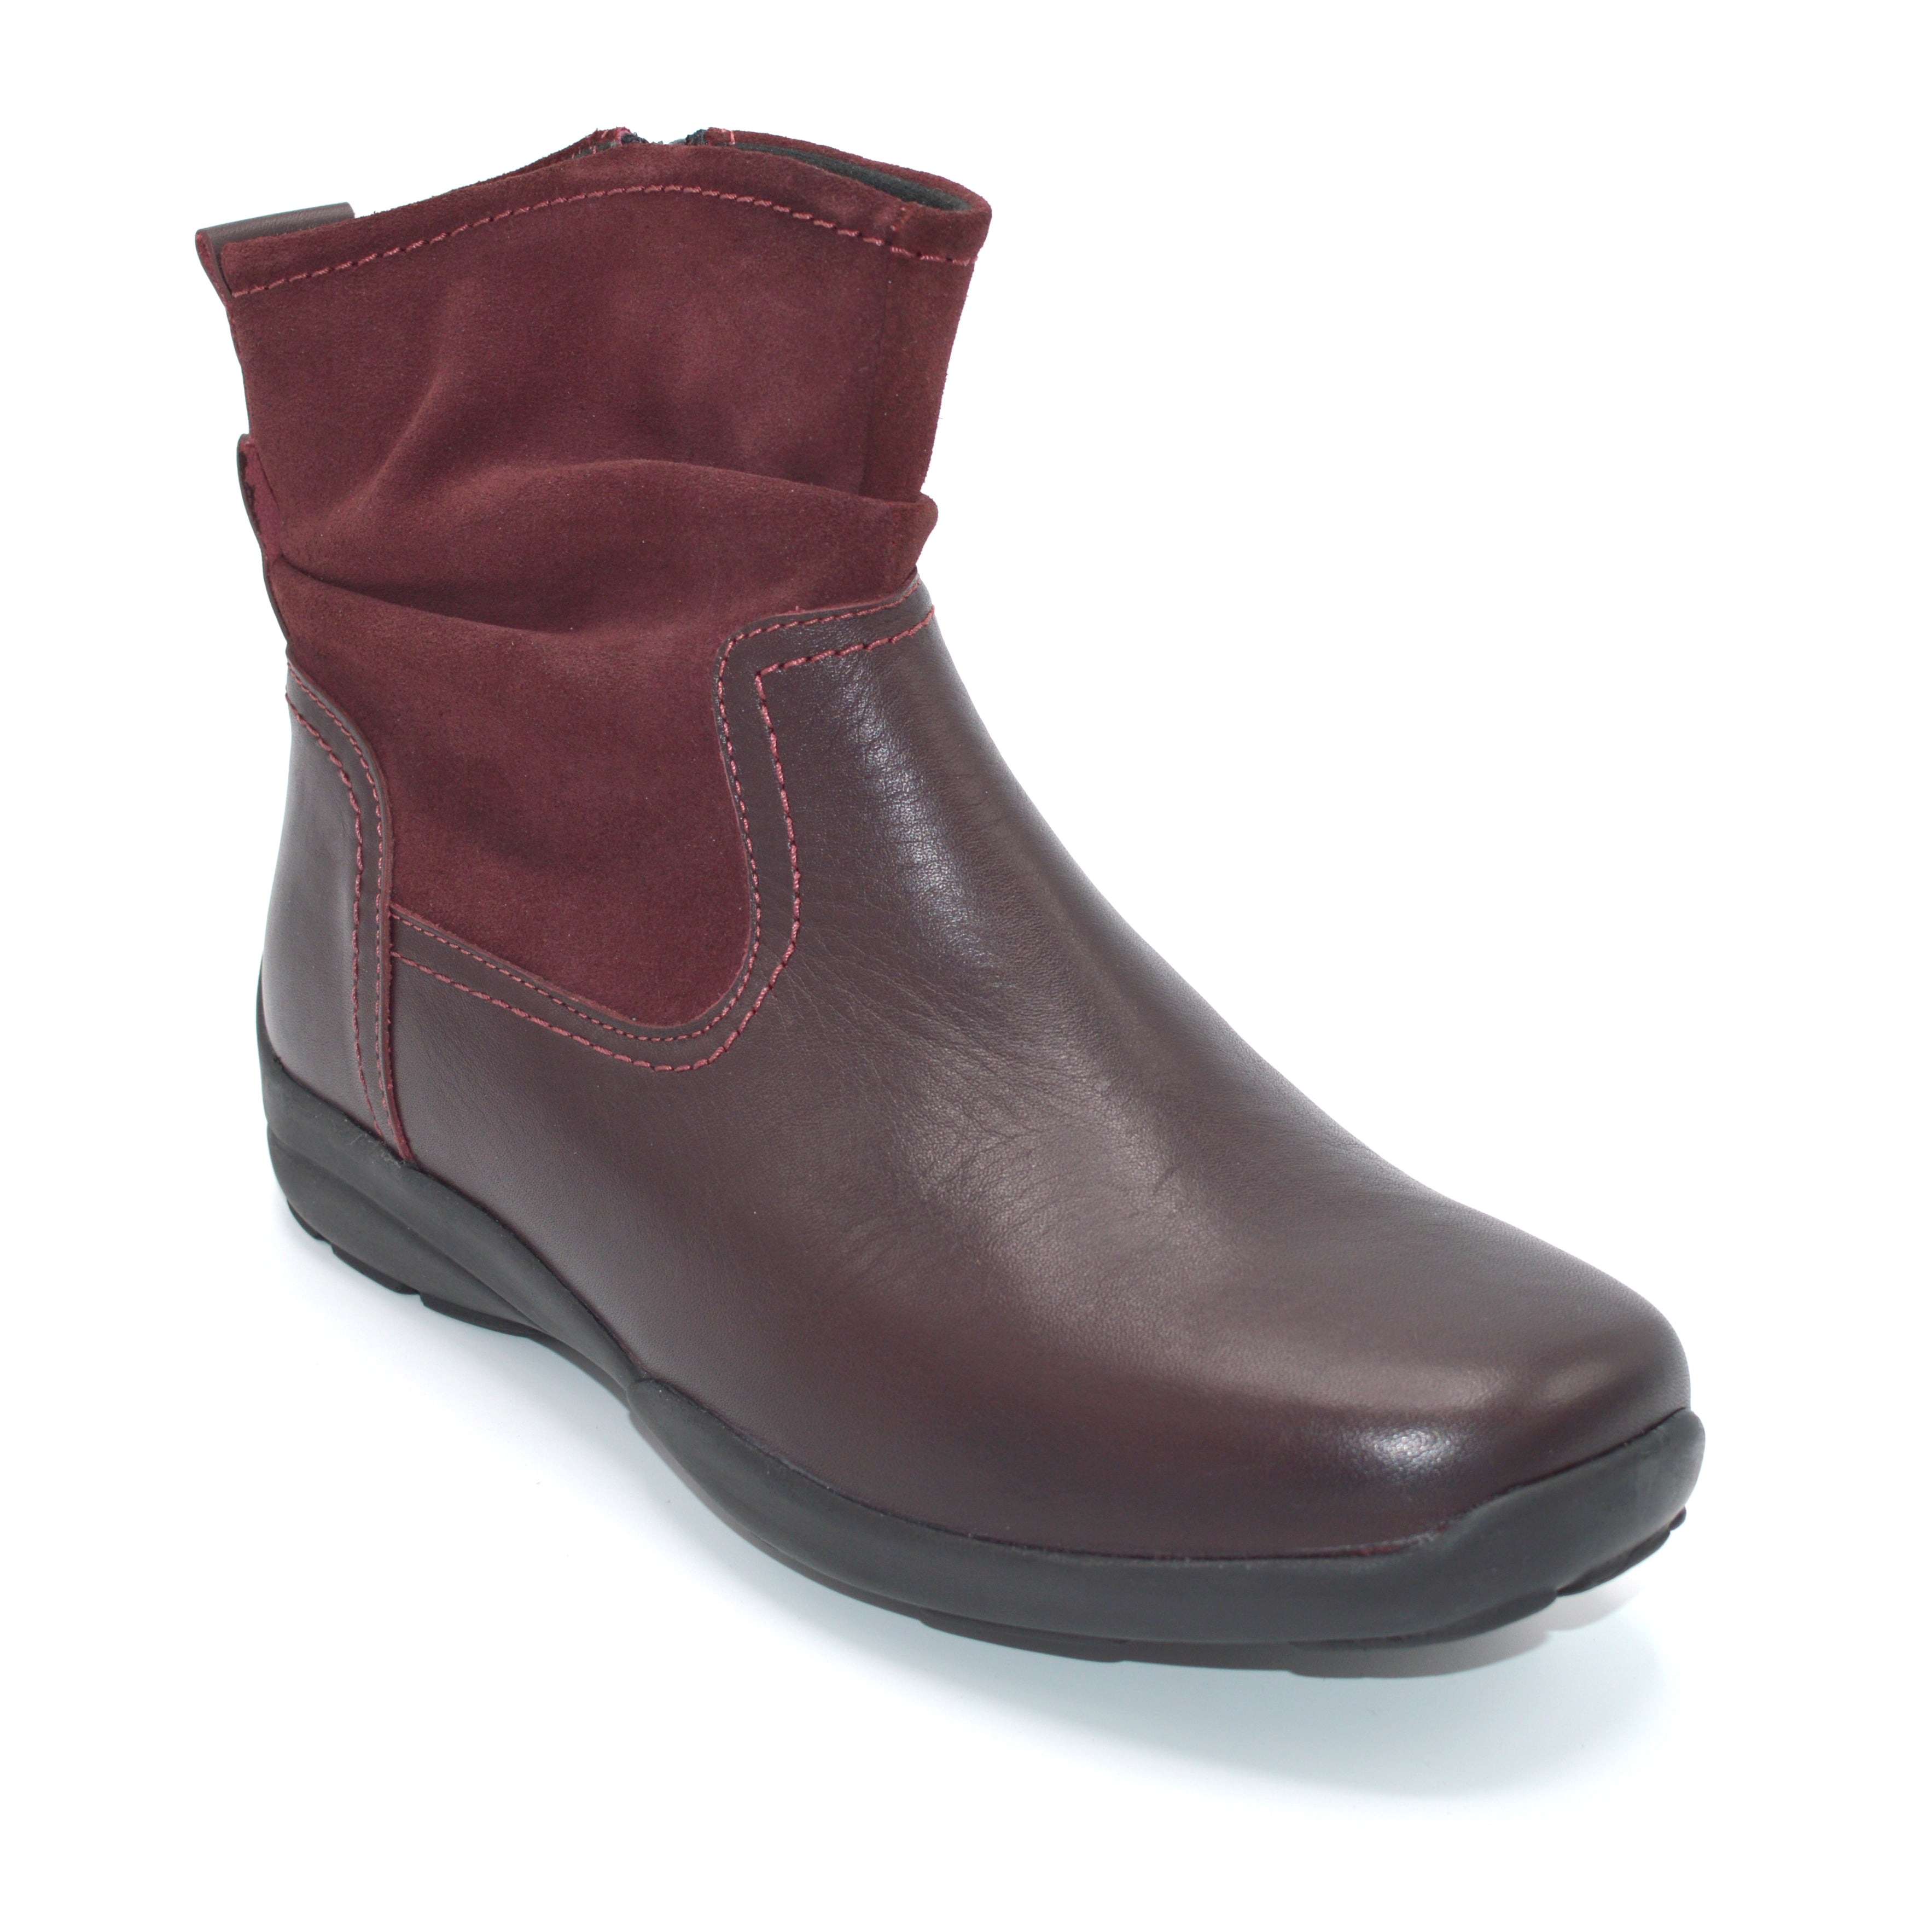 Zipped Extra Wide Fitting Boot For Orthotics